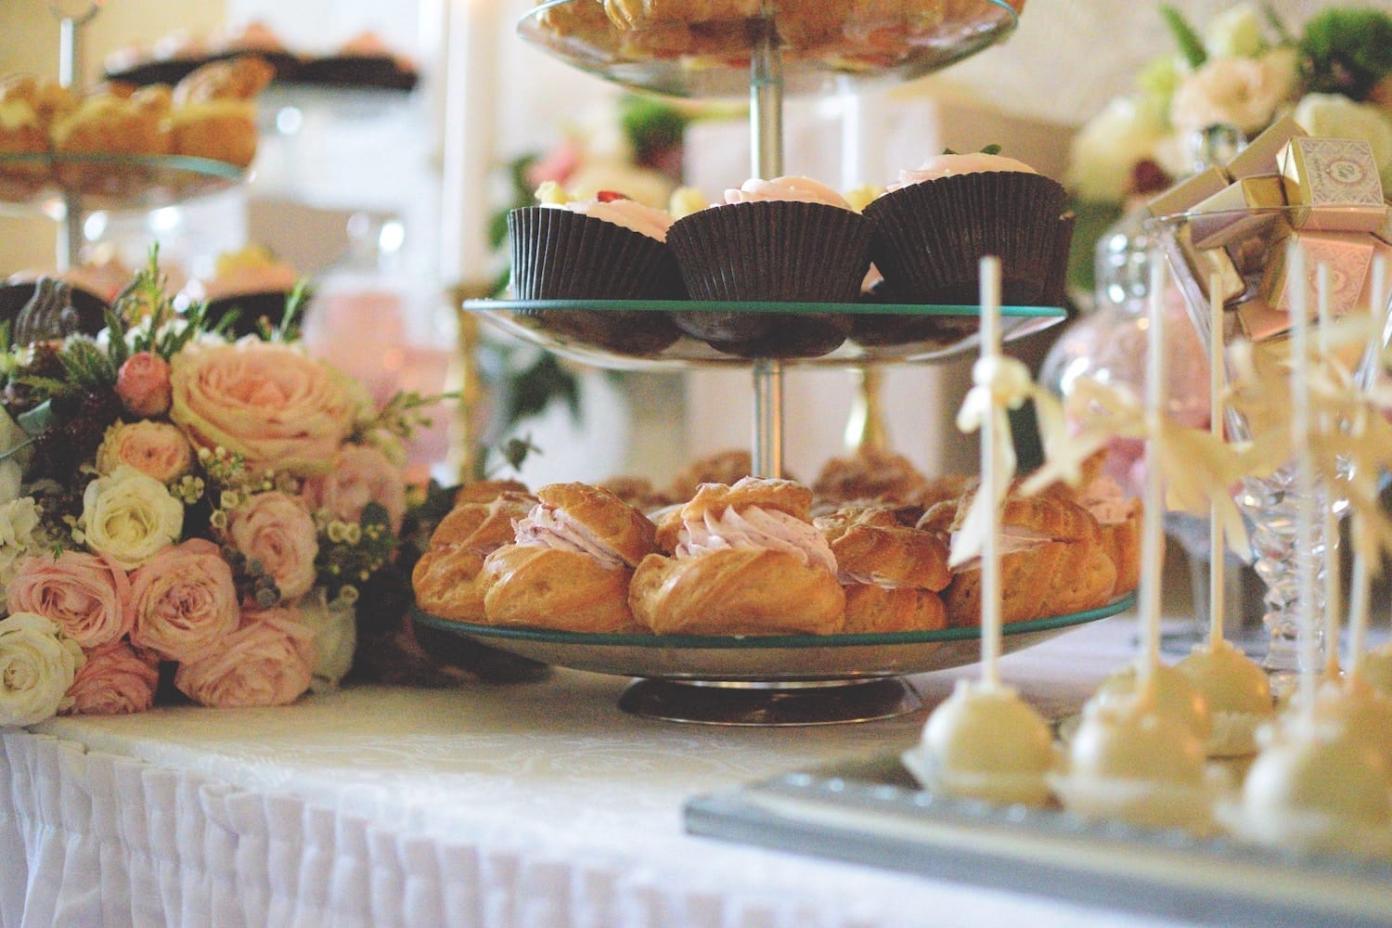 How Can I Ensure That My Wedding Catering Menu Meets the Needs of All My Guests?